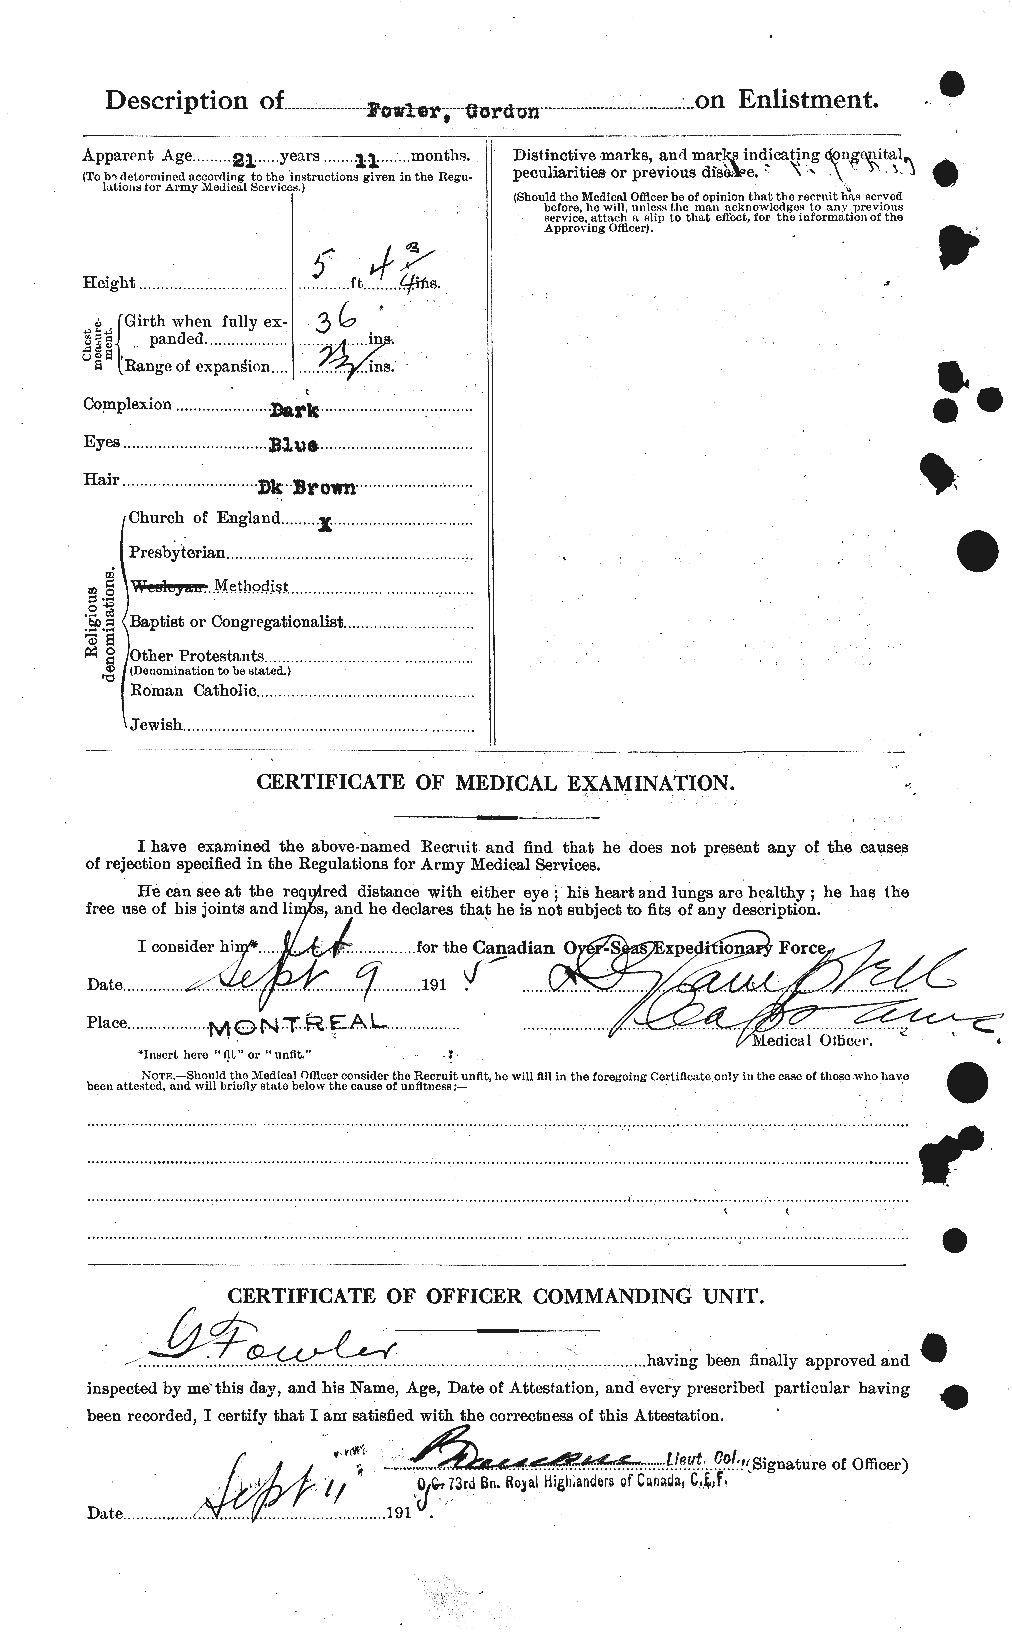 Personnel Records of the First World War - CEF 333065b